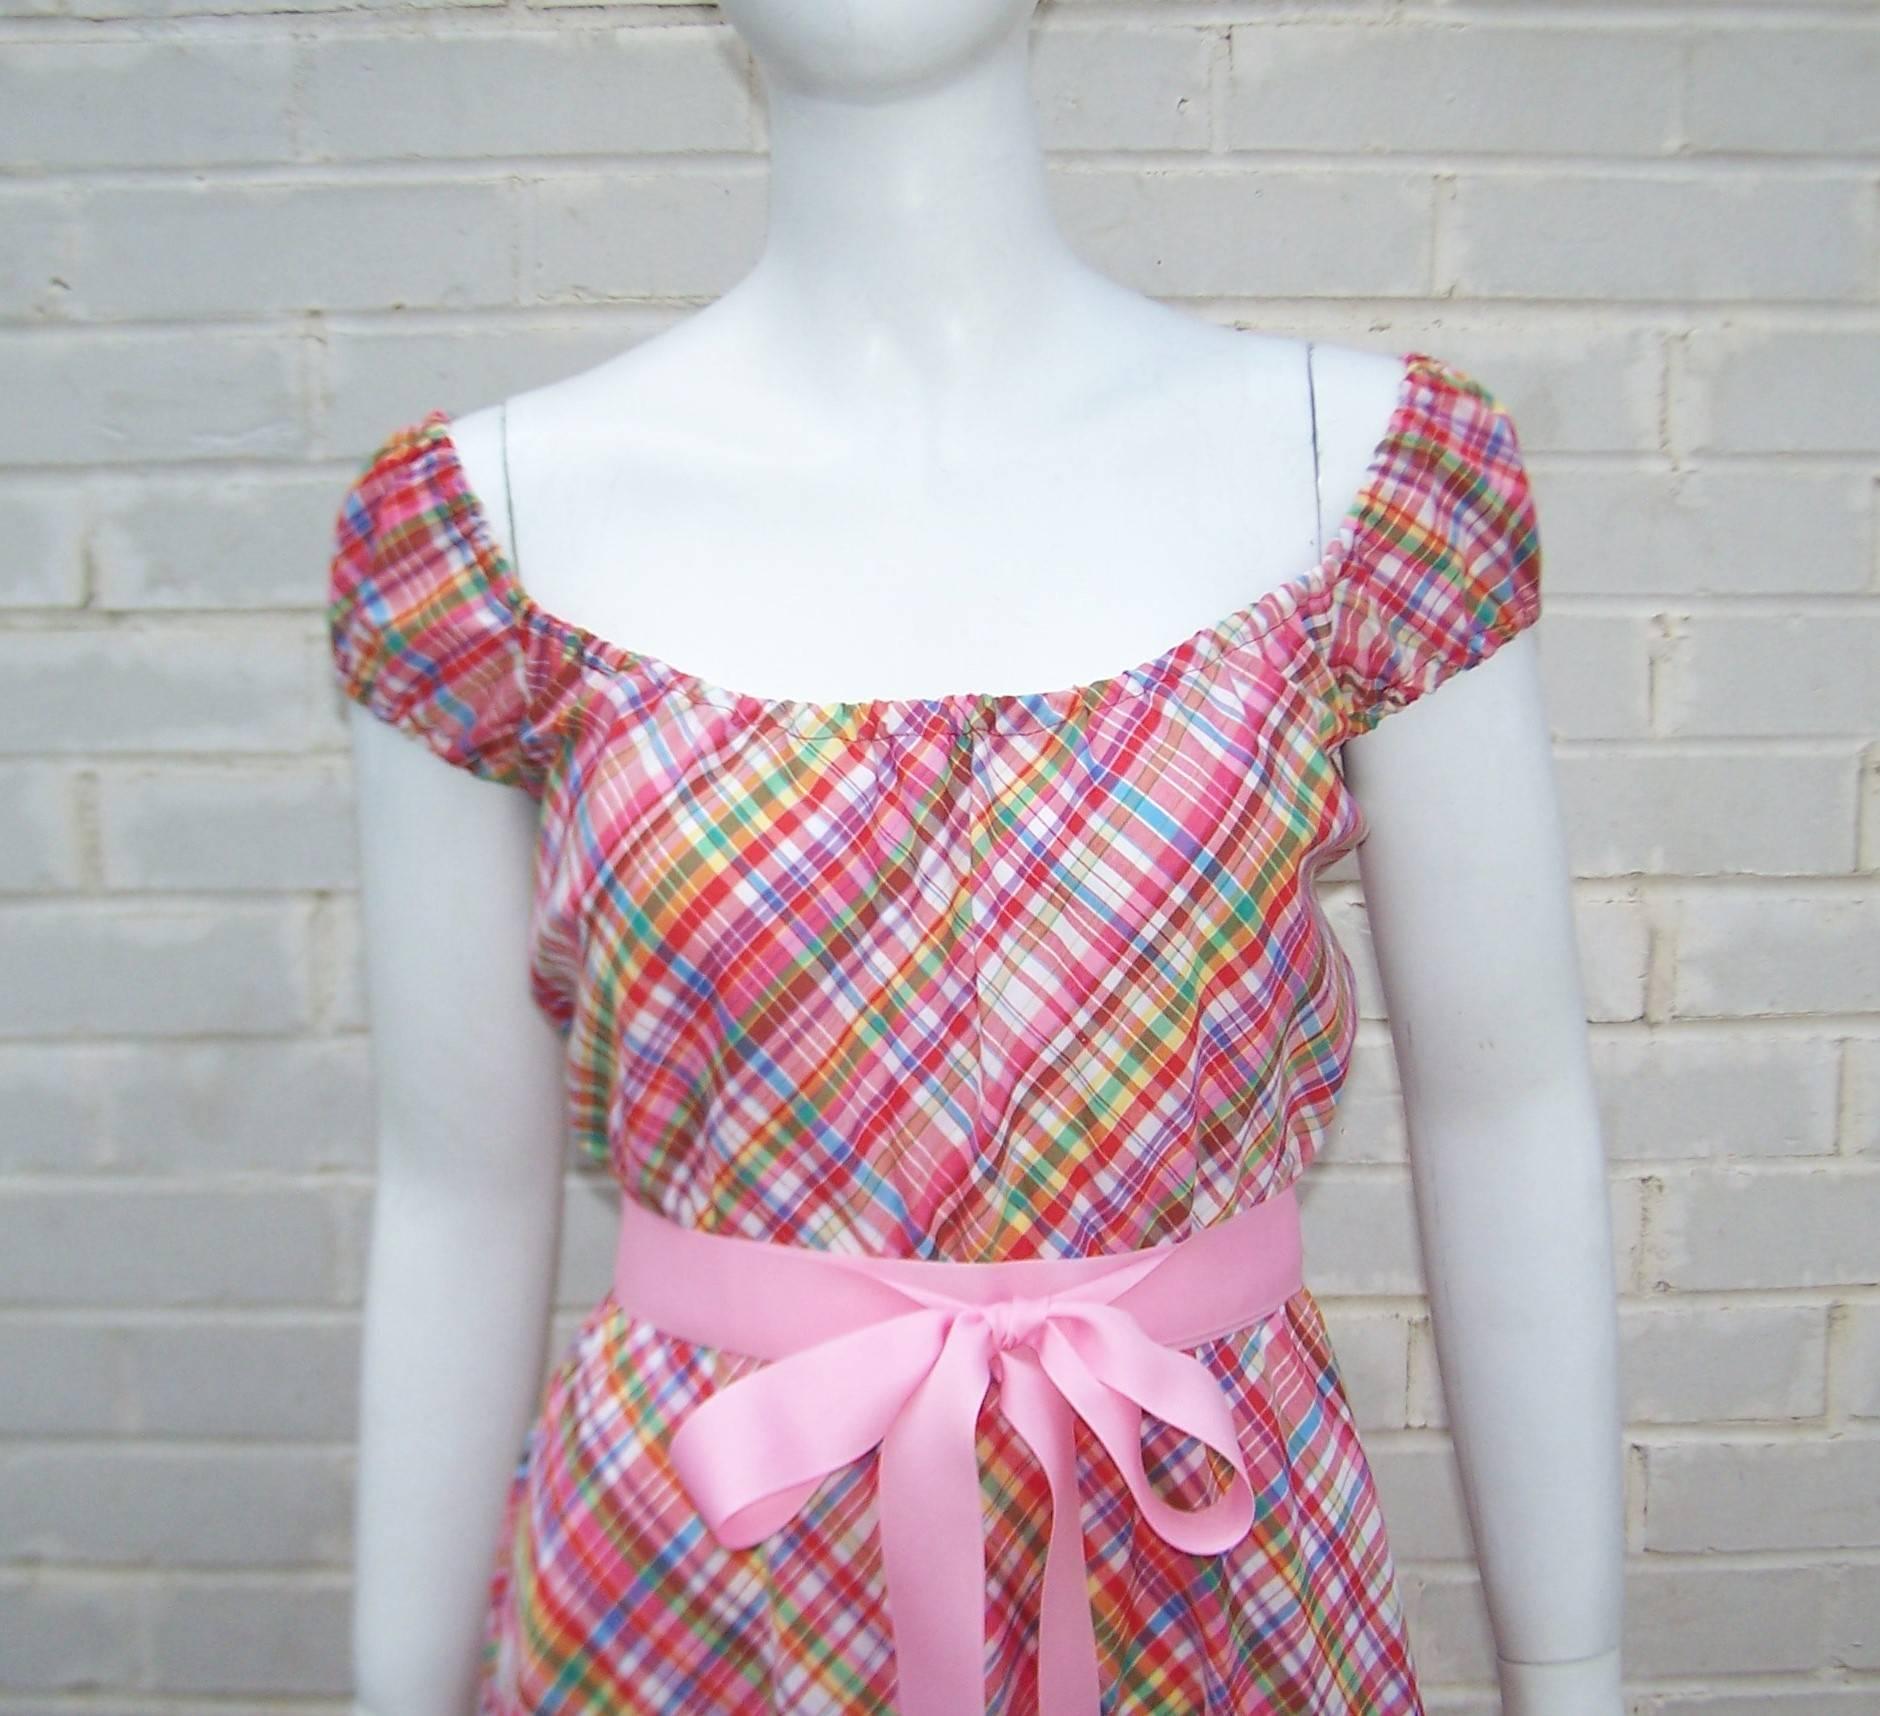 This cute 1970's Clovis Ruffin dress is light and summery with a youthful silhouette.  The dress is constructed with an easy pull on style typical of Mr. Ruffin's designs and has elasticized neckline, sleeves and waist to keep everything in place. 